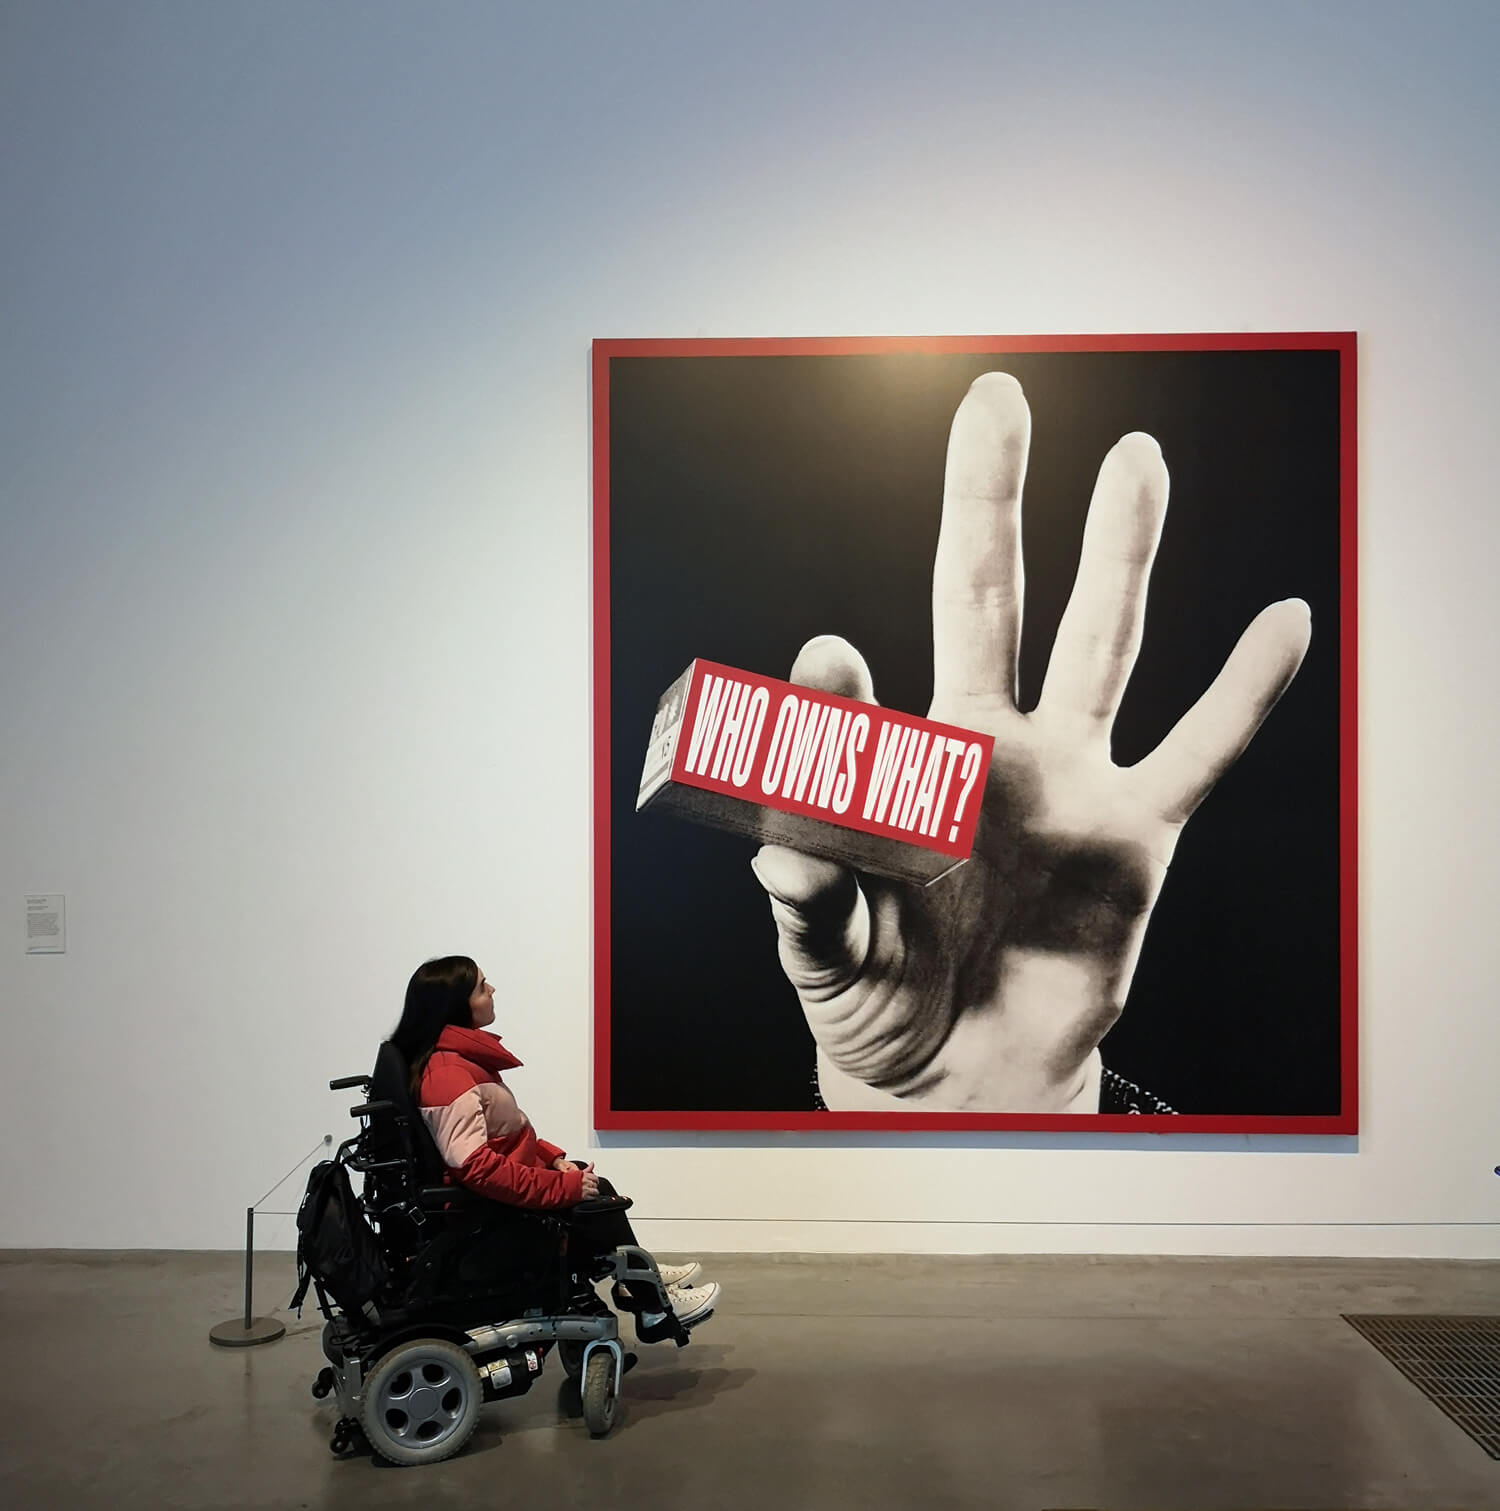 Emma looking at a art piece on the wall with a giant hand holding a sign that says "Who owns what?"